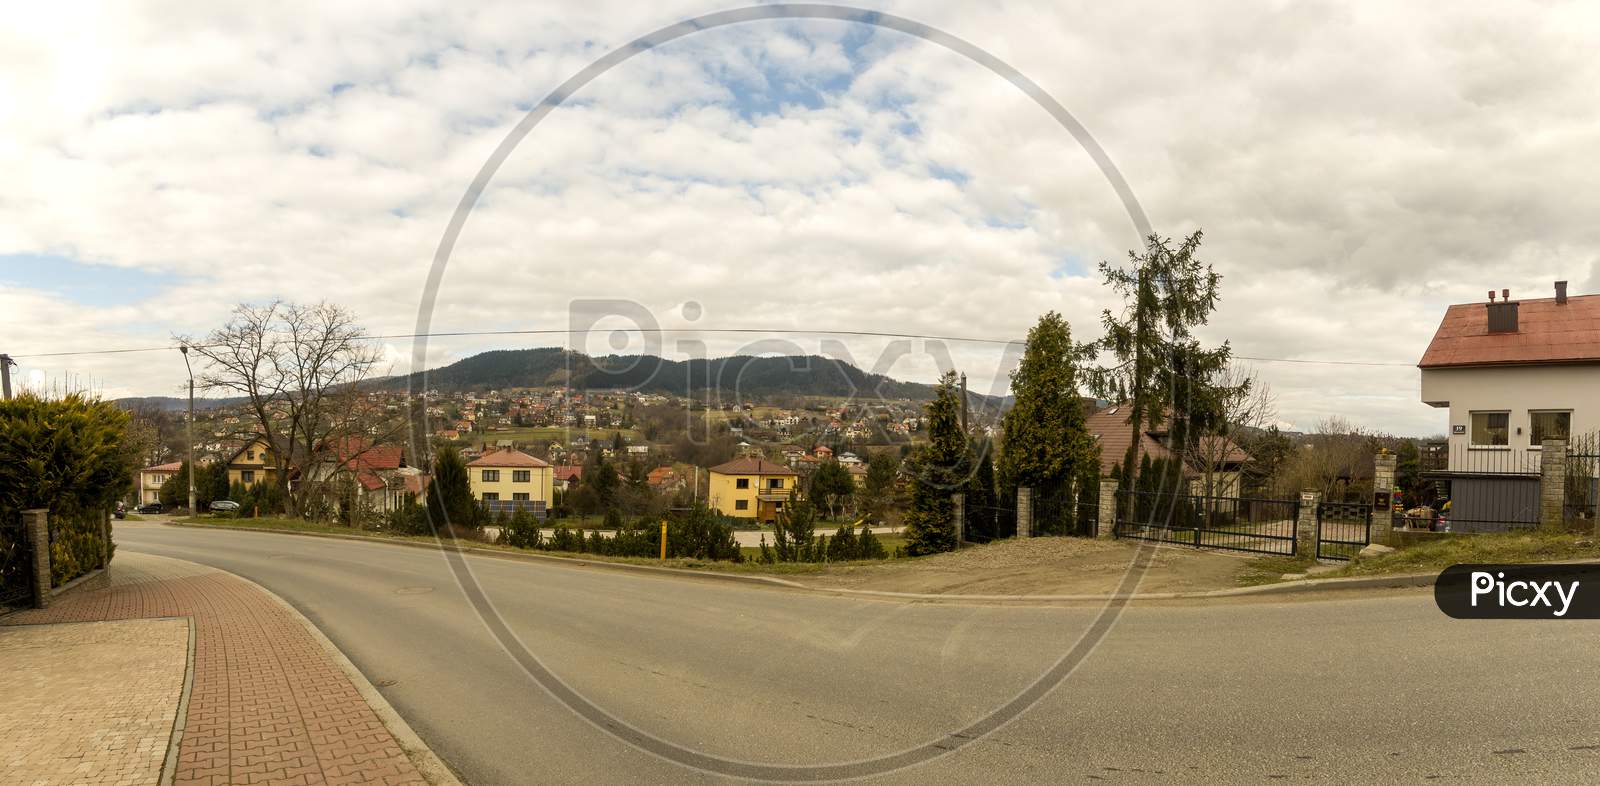 Limanowa, South Poland - April 01, 2021: Panorama View Of Houses Showing Countryside Life In Polish Village Against Polish Mountains And Dramatic Clouds.